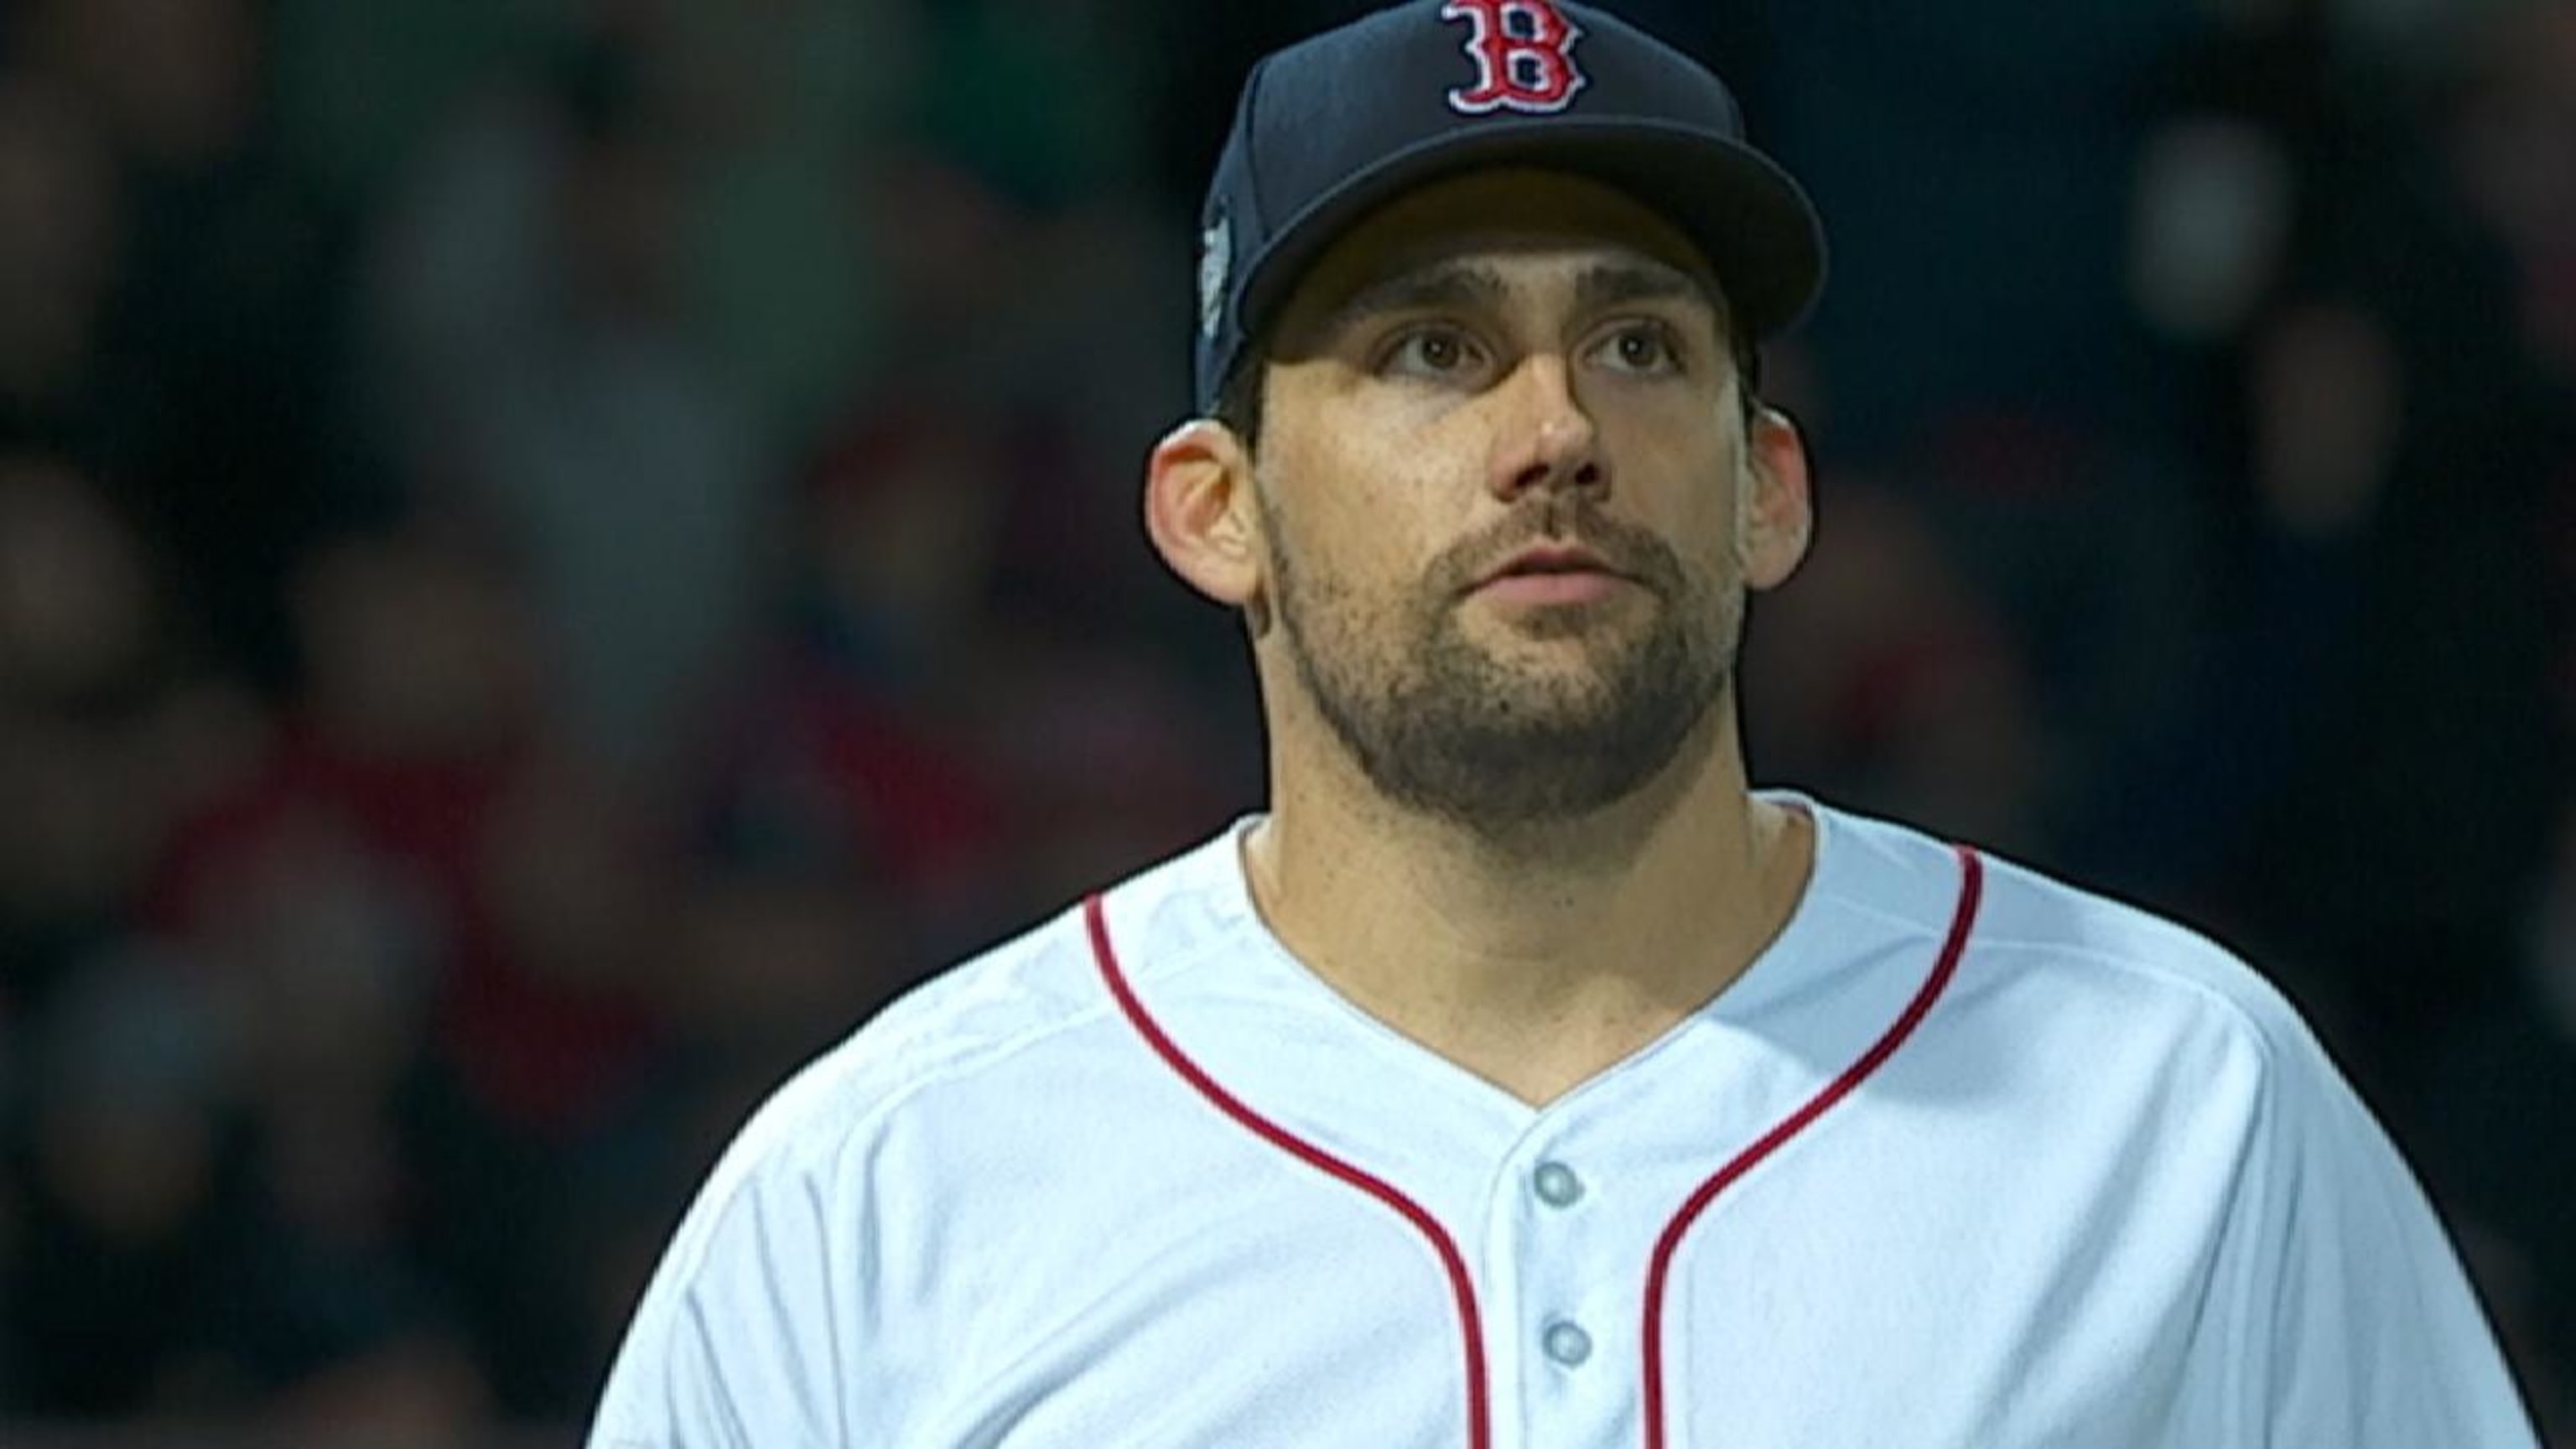 Boston Red Sox - The Red Sox today signed RHP Nathan Eovaldi to a four-year  contract through the 2022 season. The club's 40-man roster is now at 40